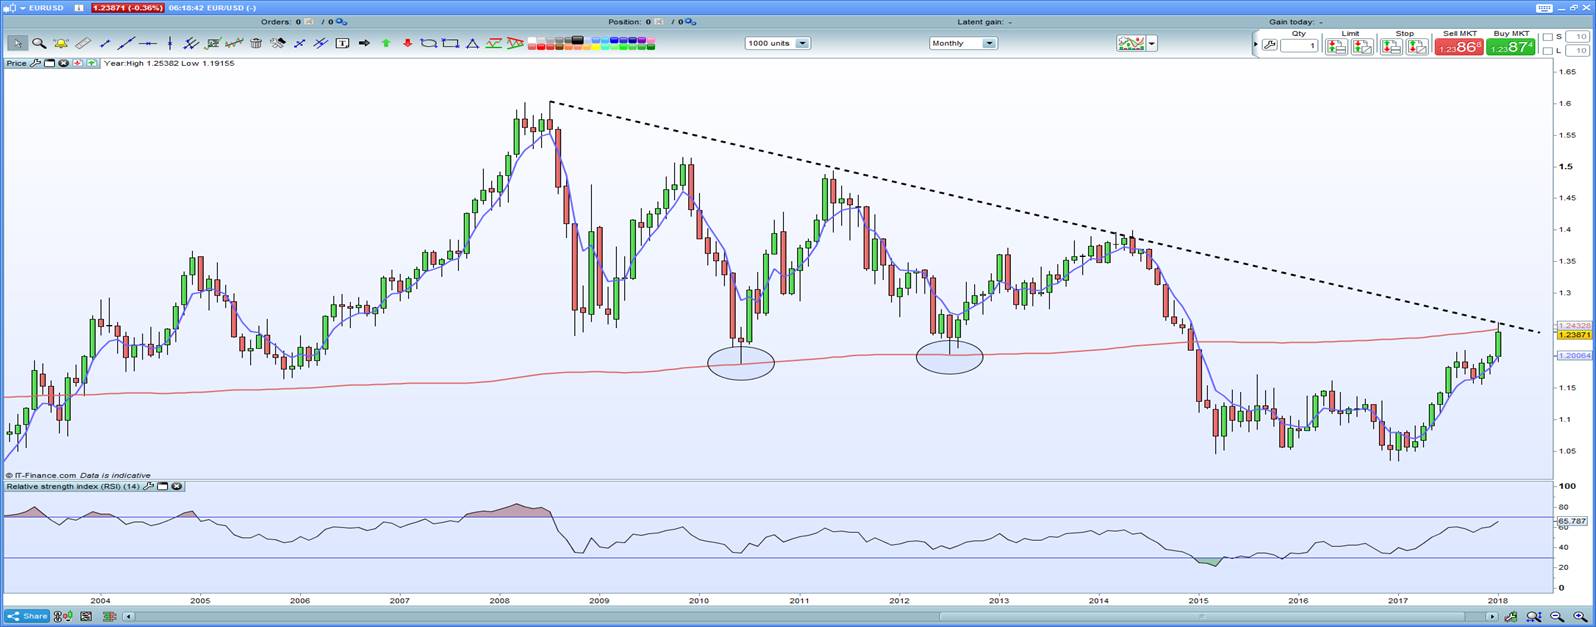 EUR/USD Monthly Chart